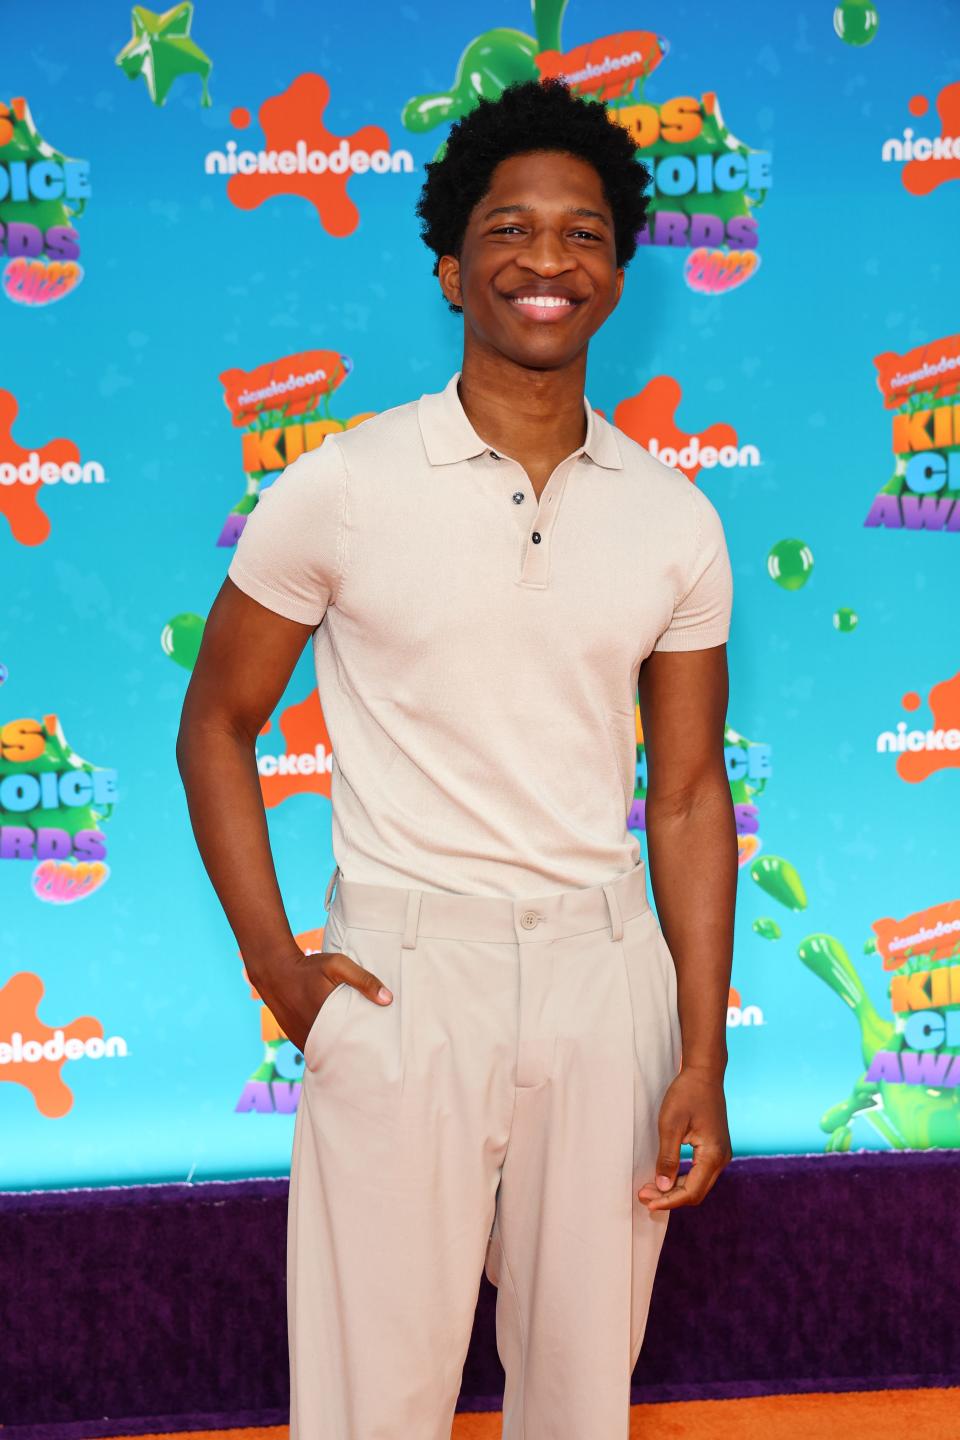 Lex Lumpkin, shown here at the 2023 Nickelodeon Kids' Choice Awards in Los Angeles, has performed at Indiana Repertory Theatre. (Photo by Leon Bennett/Getty Images)